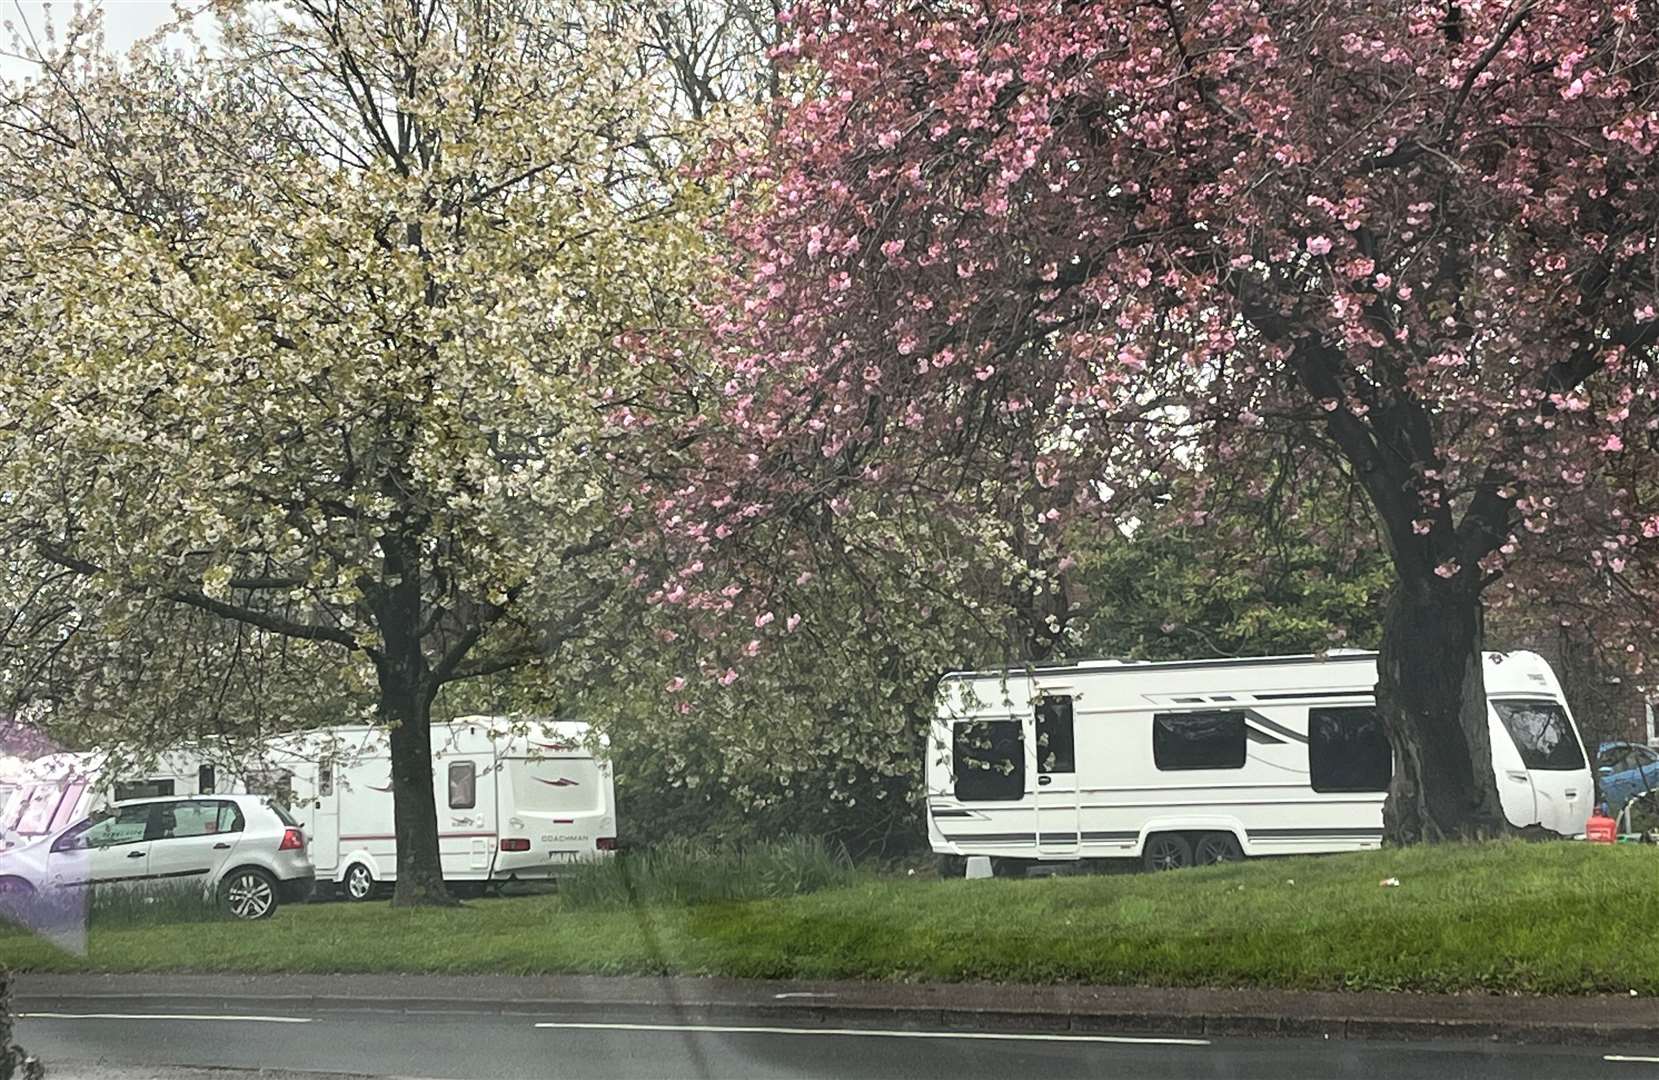 The picturesque village of Hartley has been disturbed by travellers who have set up camp in the local children's play area.